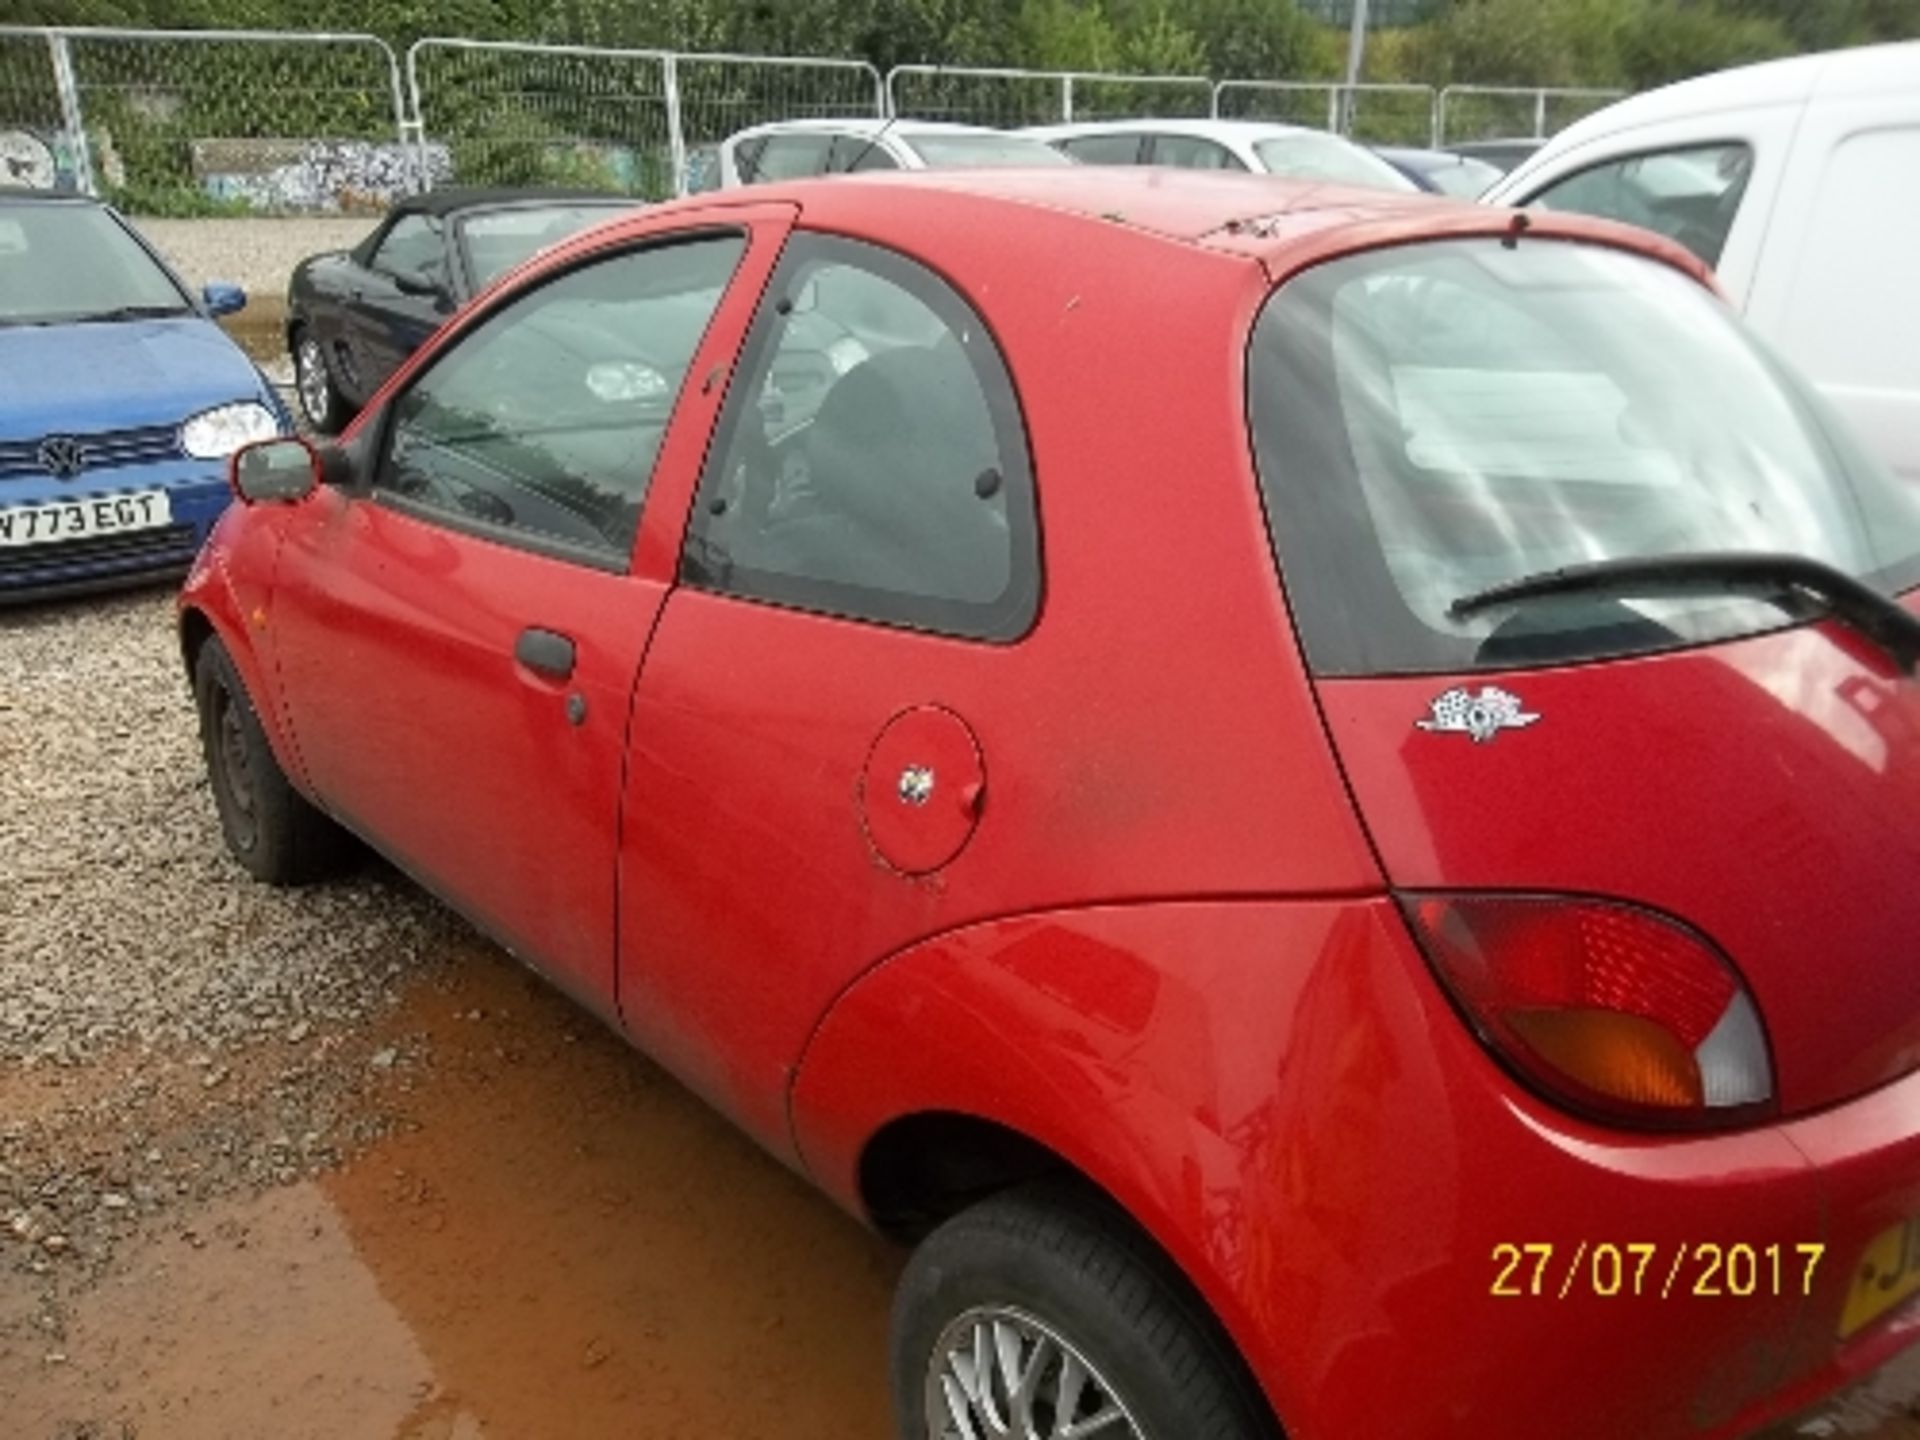 Ford KA Style - JLZ 1258 Date of first registration in UK: 27.09.2002 (previously registered - Image 4 of 4